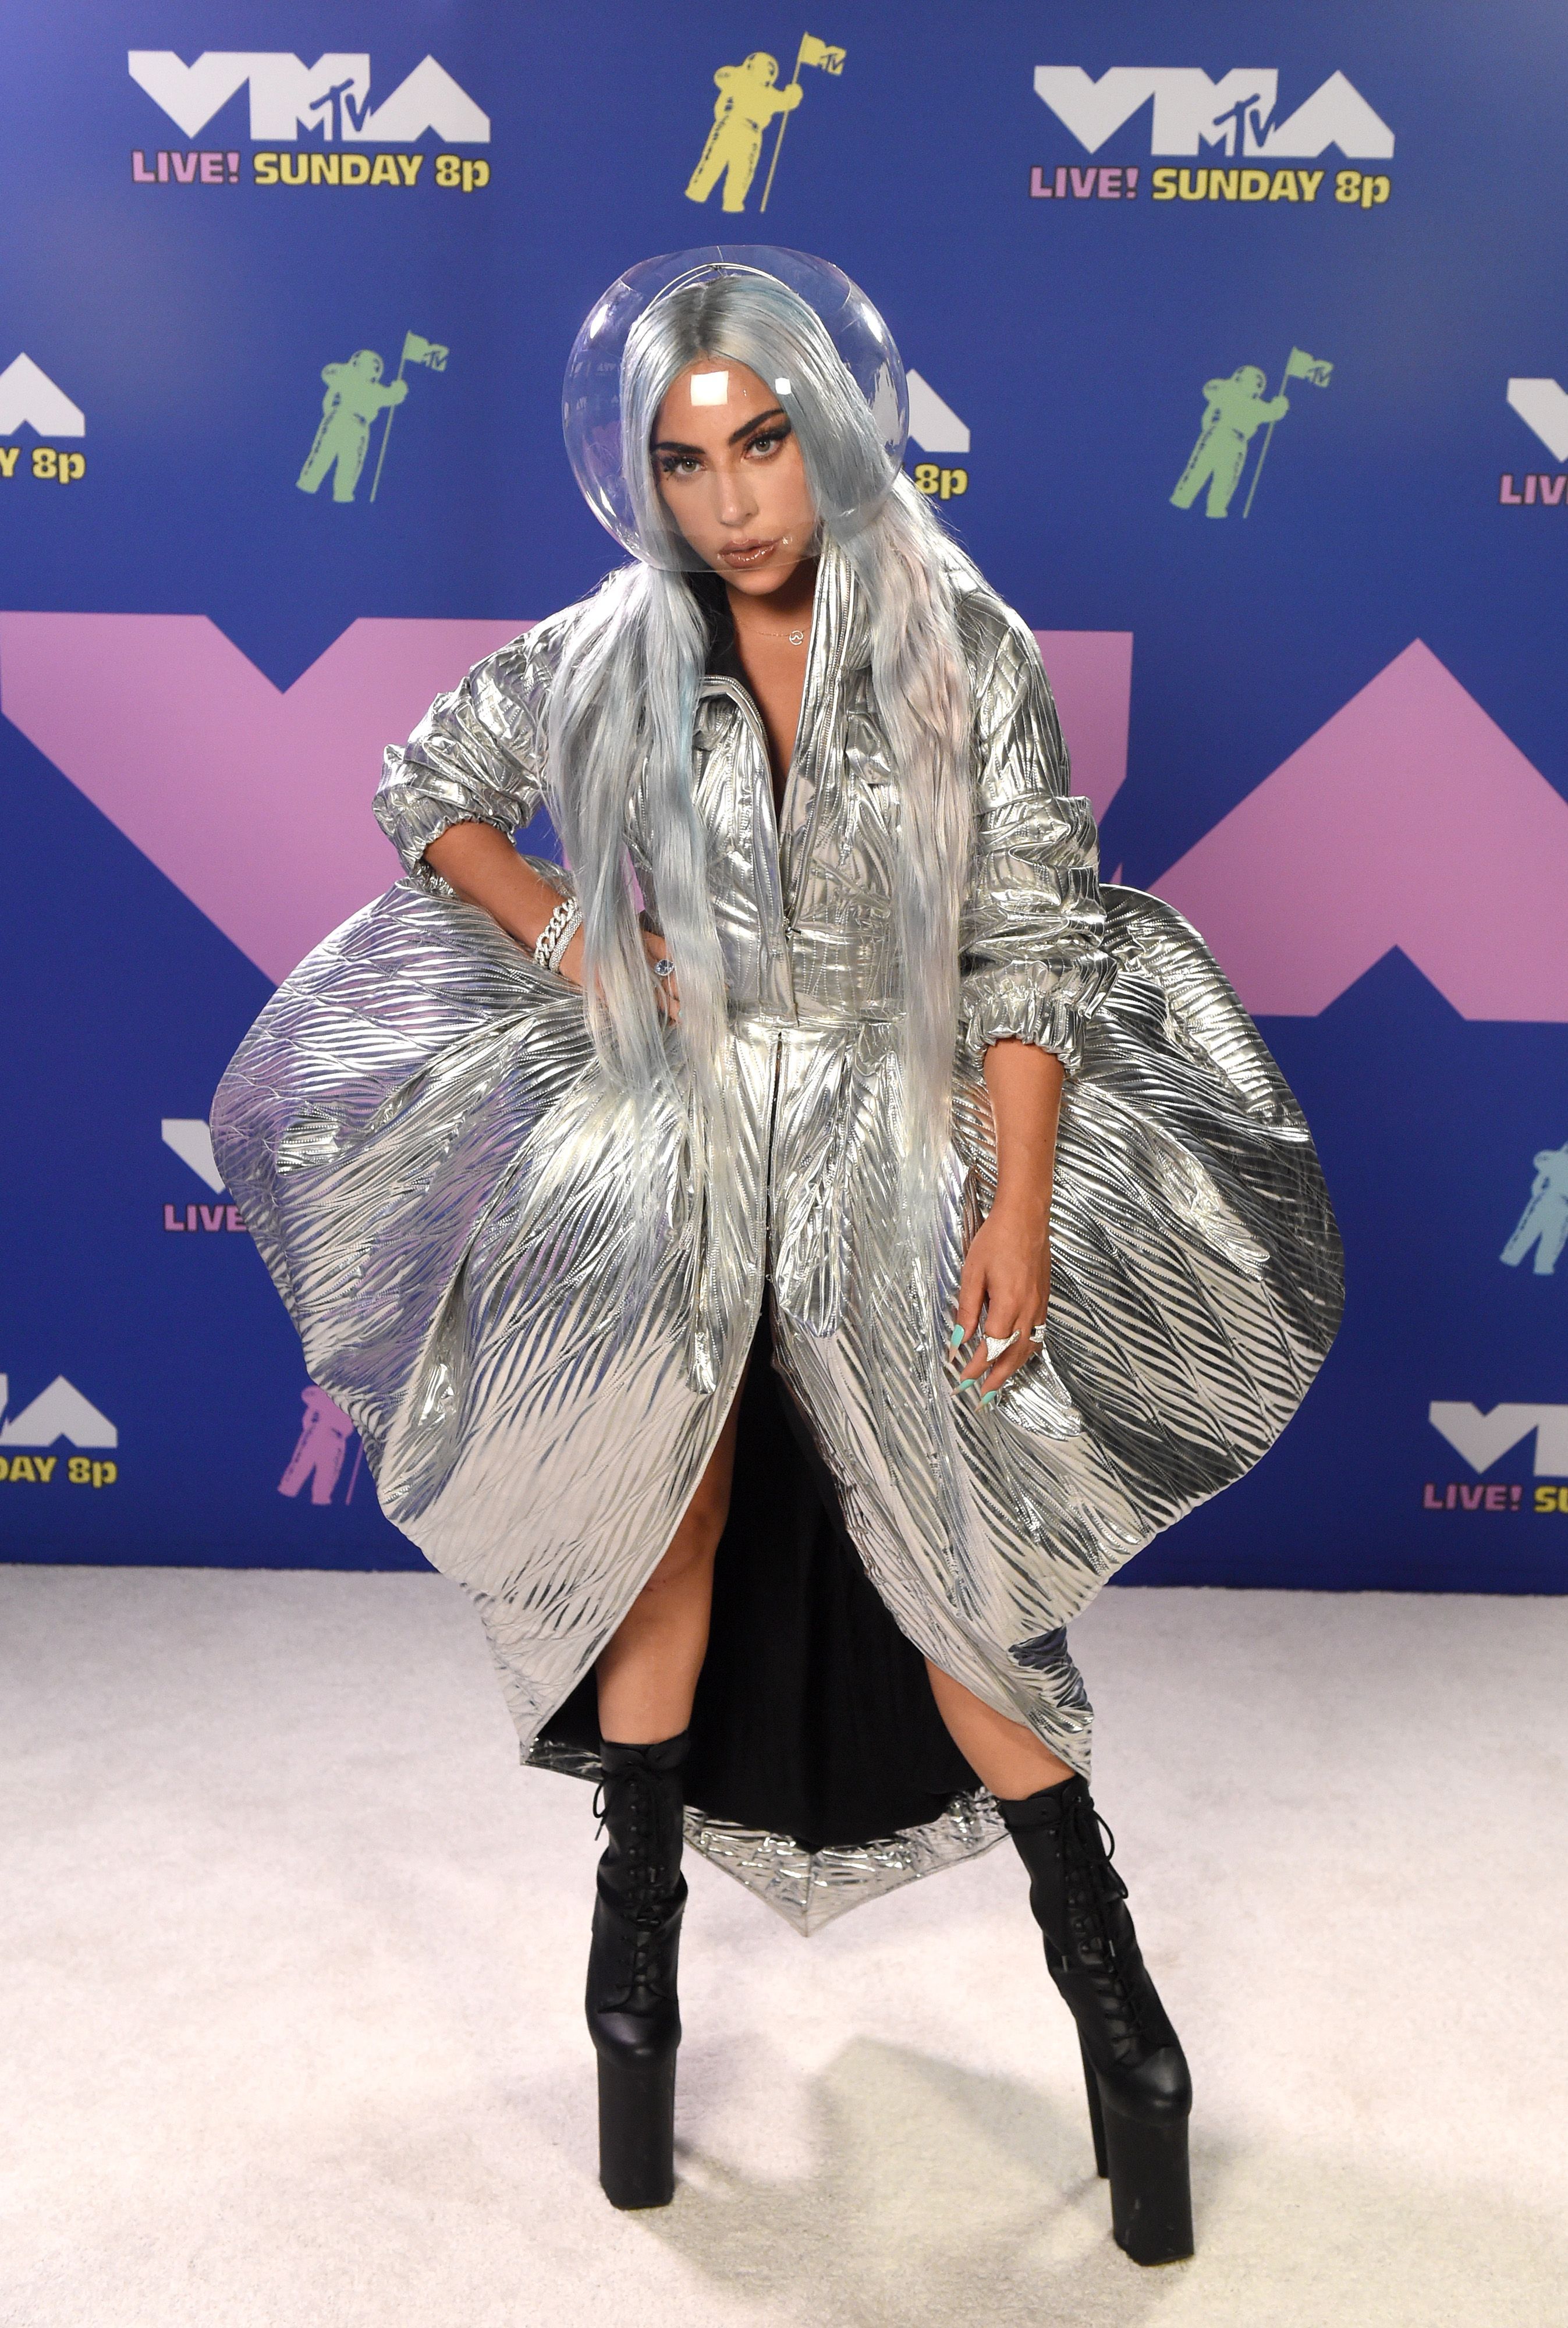 Lady Gaga attends the MTV Video Music Awards in New York on August 30, 2020 | Photo: Getty Images